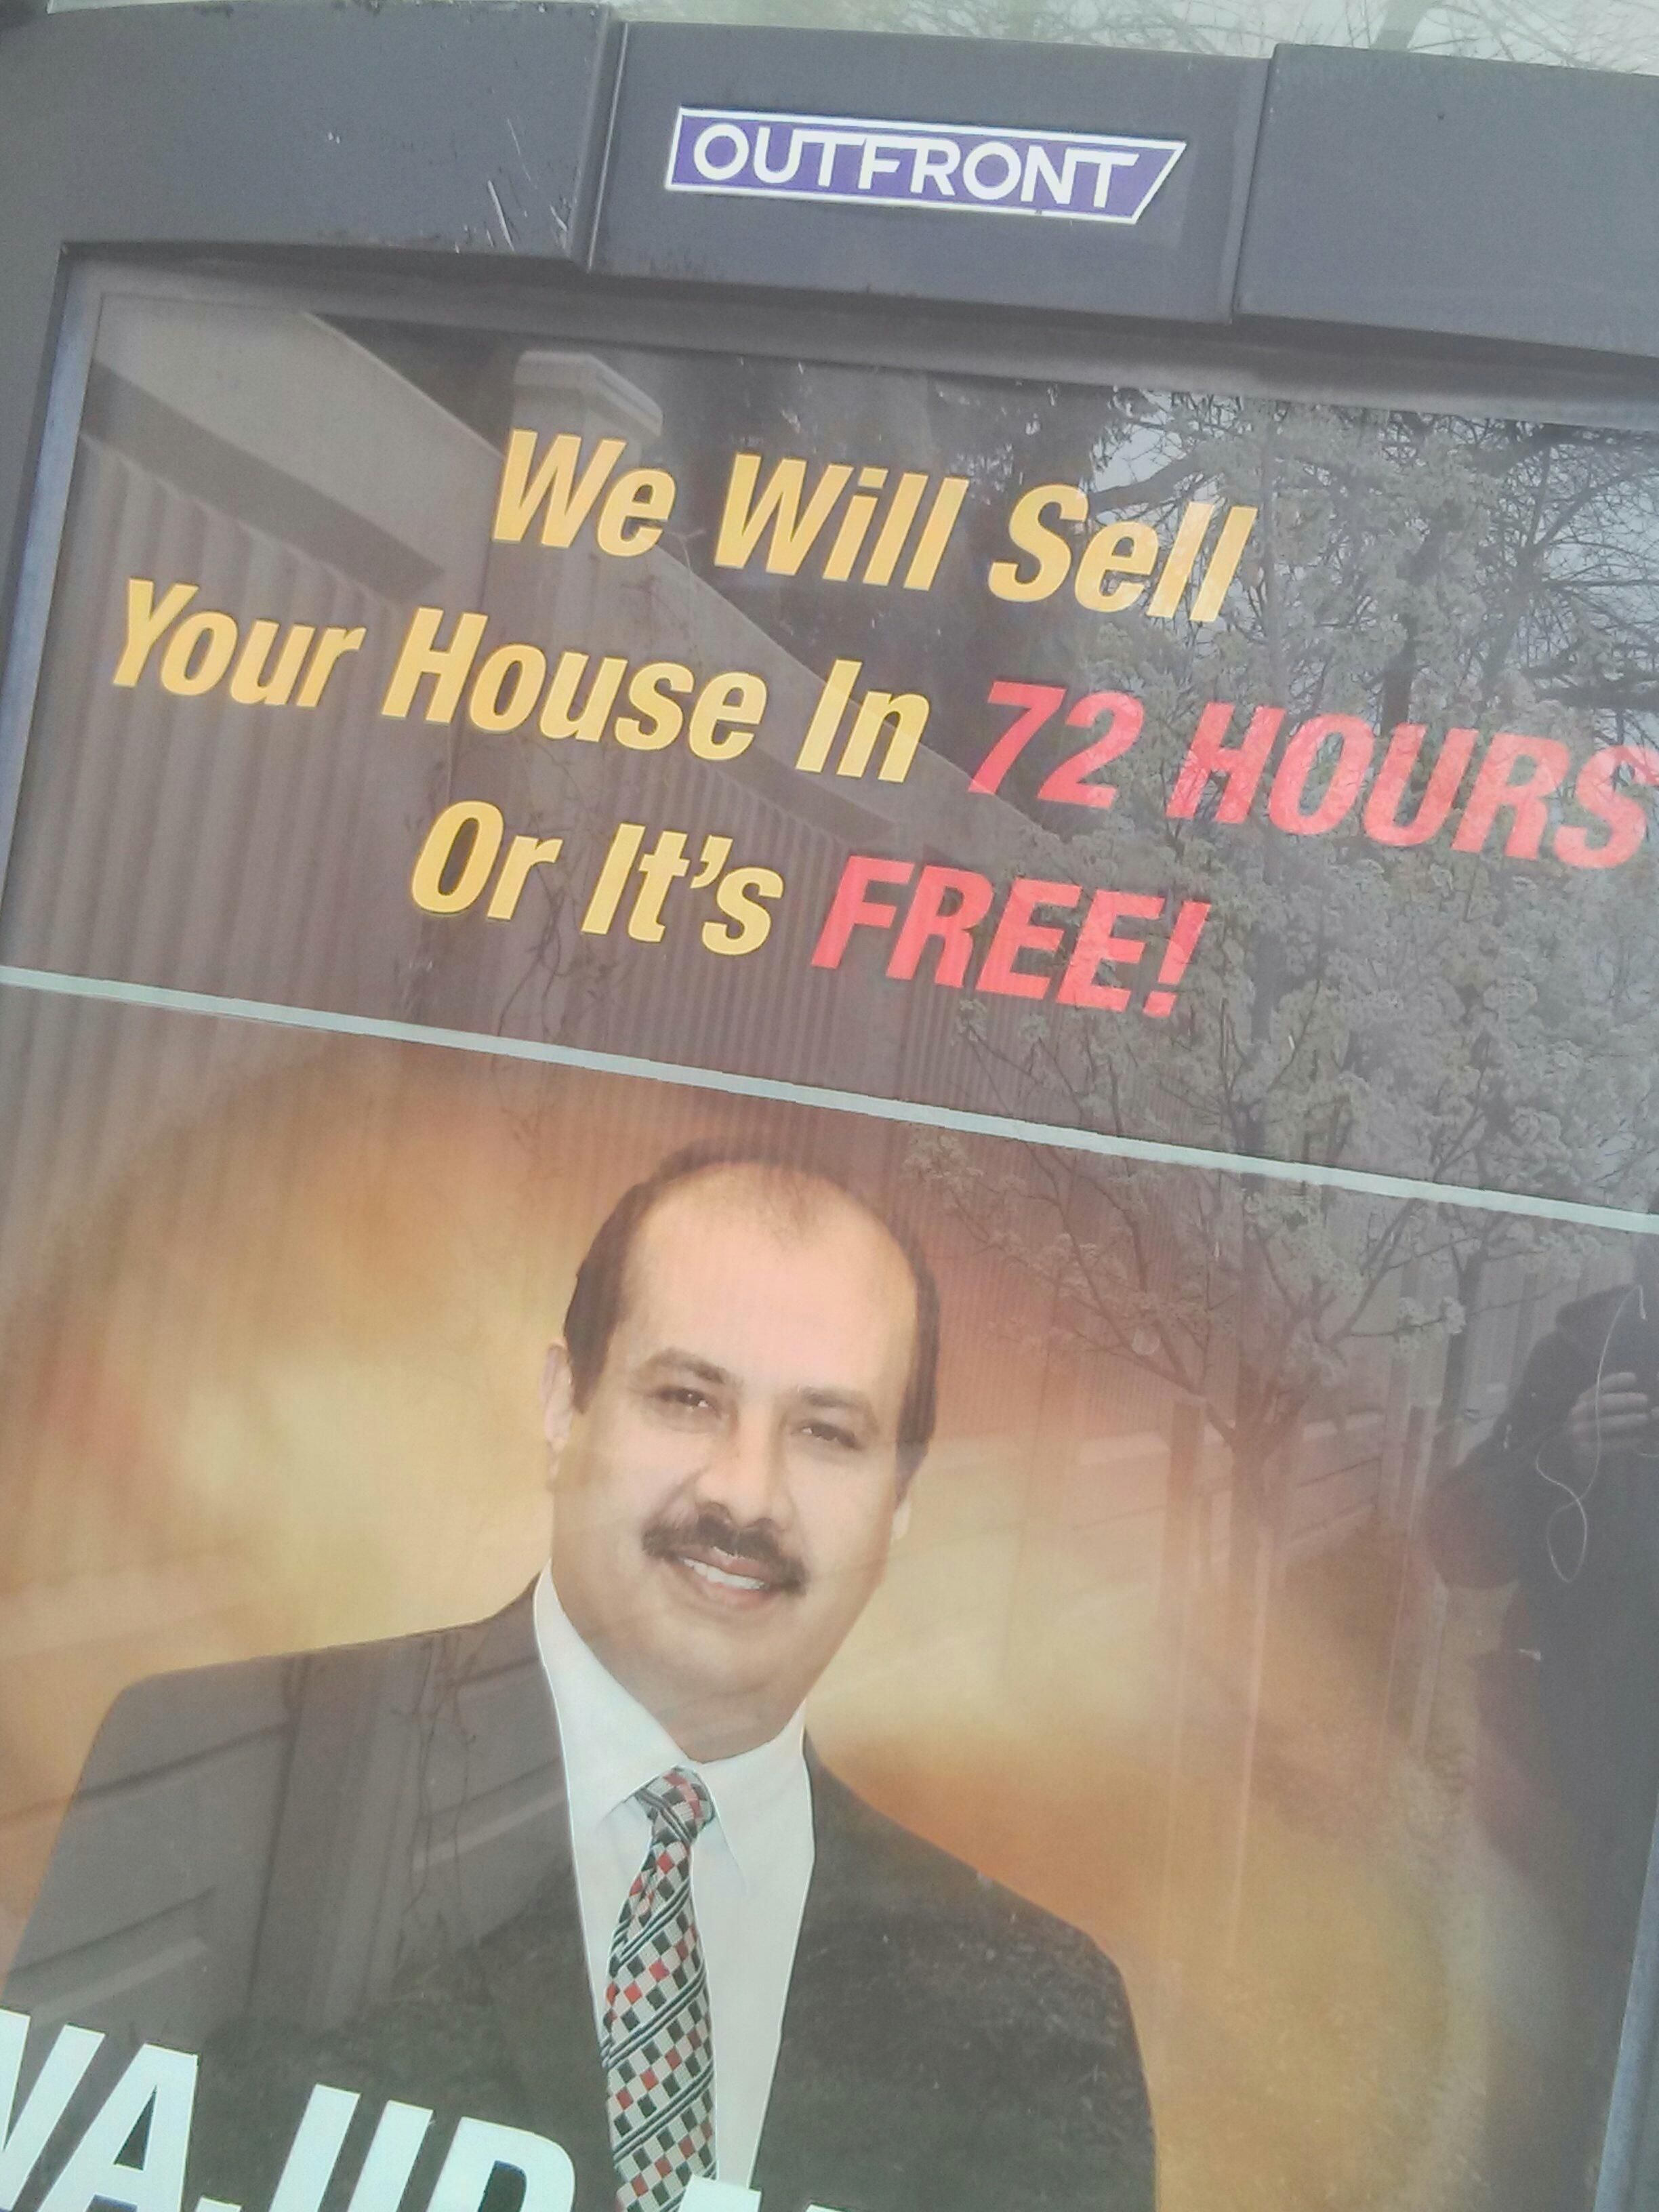 ***, you better not give my house away for free.